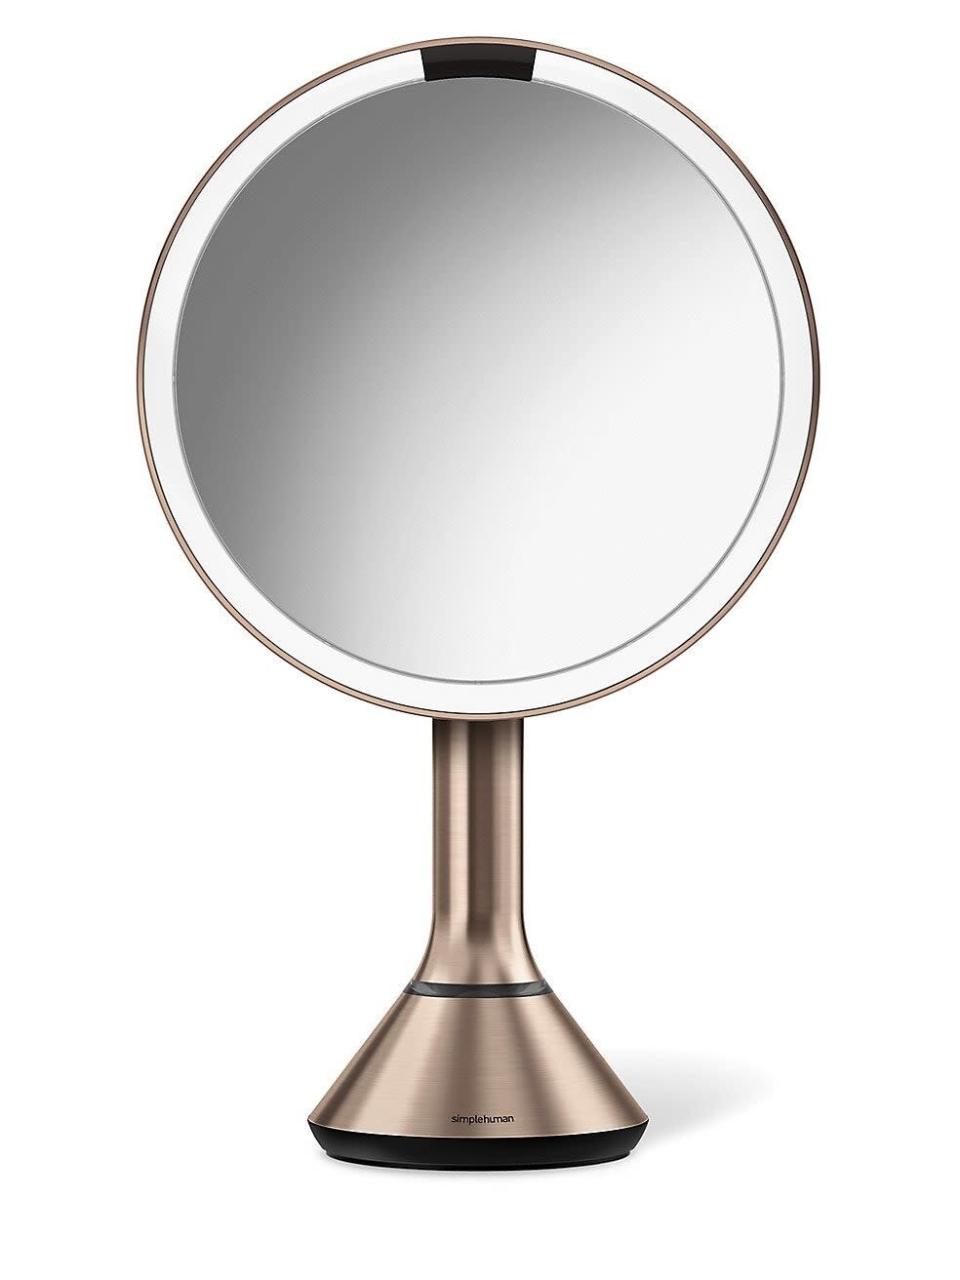 <h2>Simplehuman 8" Sensor Makeup Mirror</h2><br>While not a skin-care savior <em>per se</em>, this innovative smart mirror is a must-have for any beauty-lover — whether you're masking or carefully extracting your pores, it's an upgrade in every sense. (Pair it with your phone using Bluetooth to listen to your favorite playlist while pampering yourself.)<br><br><em>Shop <strong><a href="https://fave.co/3AIOq4W" rel="nofollow noopener" target="_blank" data-ylk="slk:Simplehuman" class="link ">Simplehuman</a></strong></em><br><br><strong>simplehuman</strong> 8" Sensor Makeup Mirror, $, available at <a href="https://go.skimresources.com/?id=30283X879131&url=https%3A%2F%2Fwww.saksfifthavenue.com%2Fproduct%2Fsimplehuman-8--sensor-makeup-mirror-with-brightness-control-0400099060294.html%3F" rel="nofollow noopener" target="_blank" data-ylk="slk:Saks Fifth Avenue" class="link ">Saks Fifth Avenue</a>